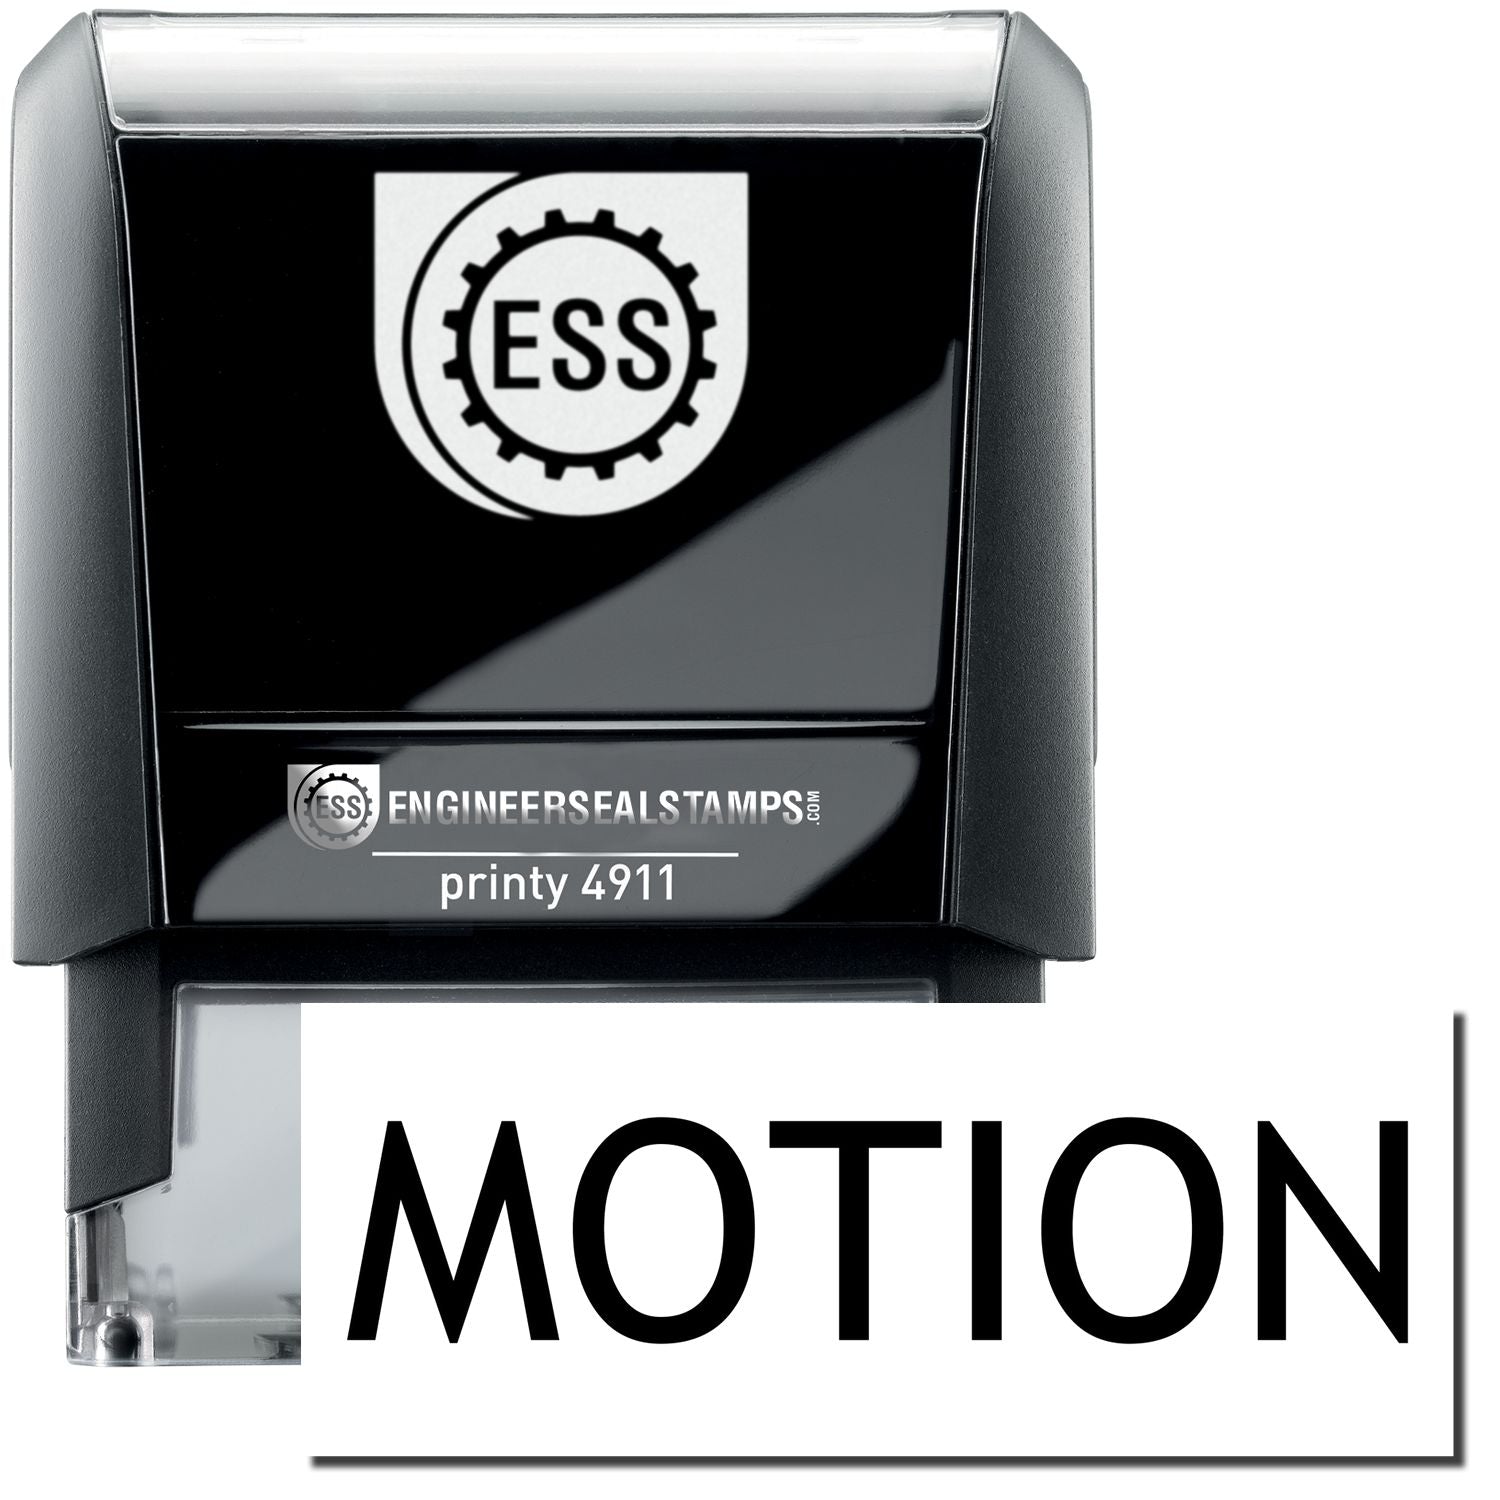 A self-inking stamp with a stamped image showing how the text "MOTION" is displayed after stamping.